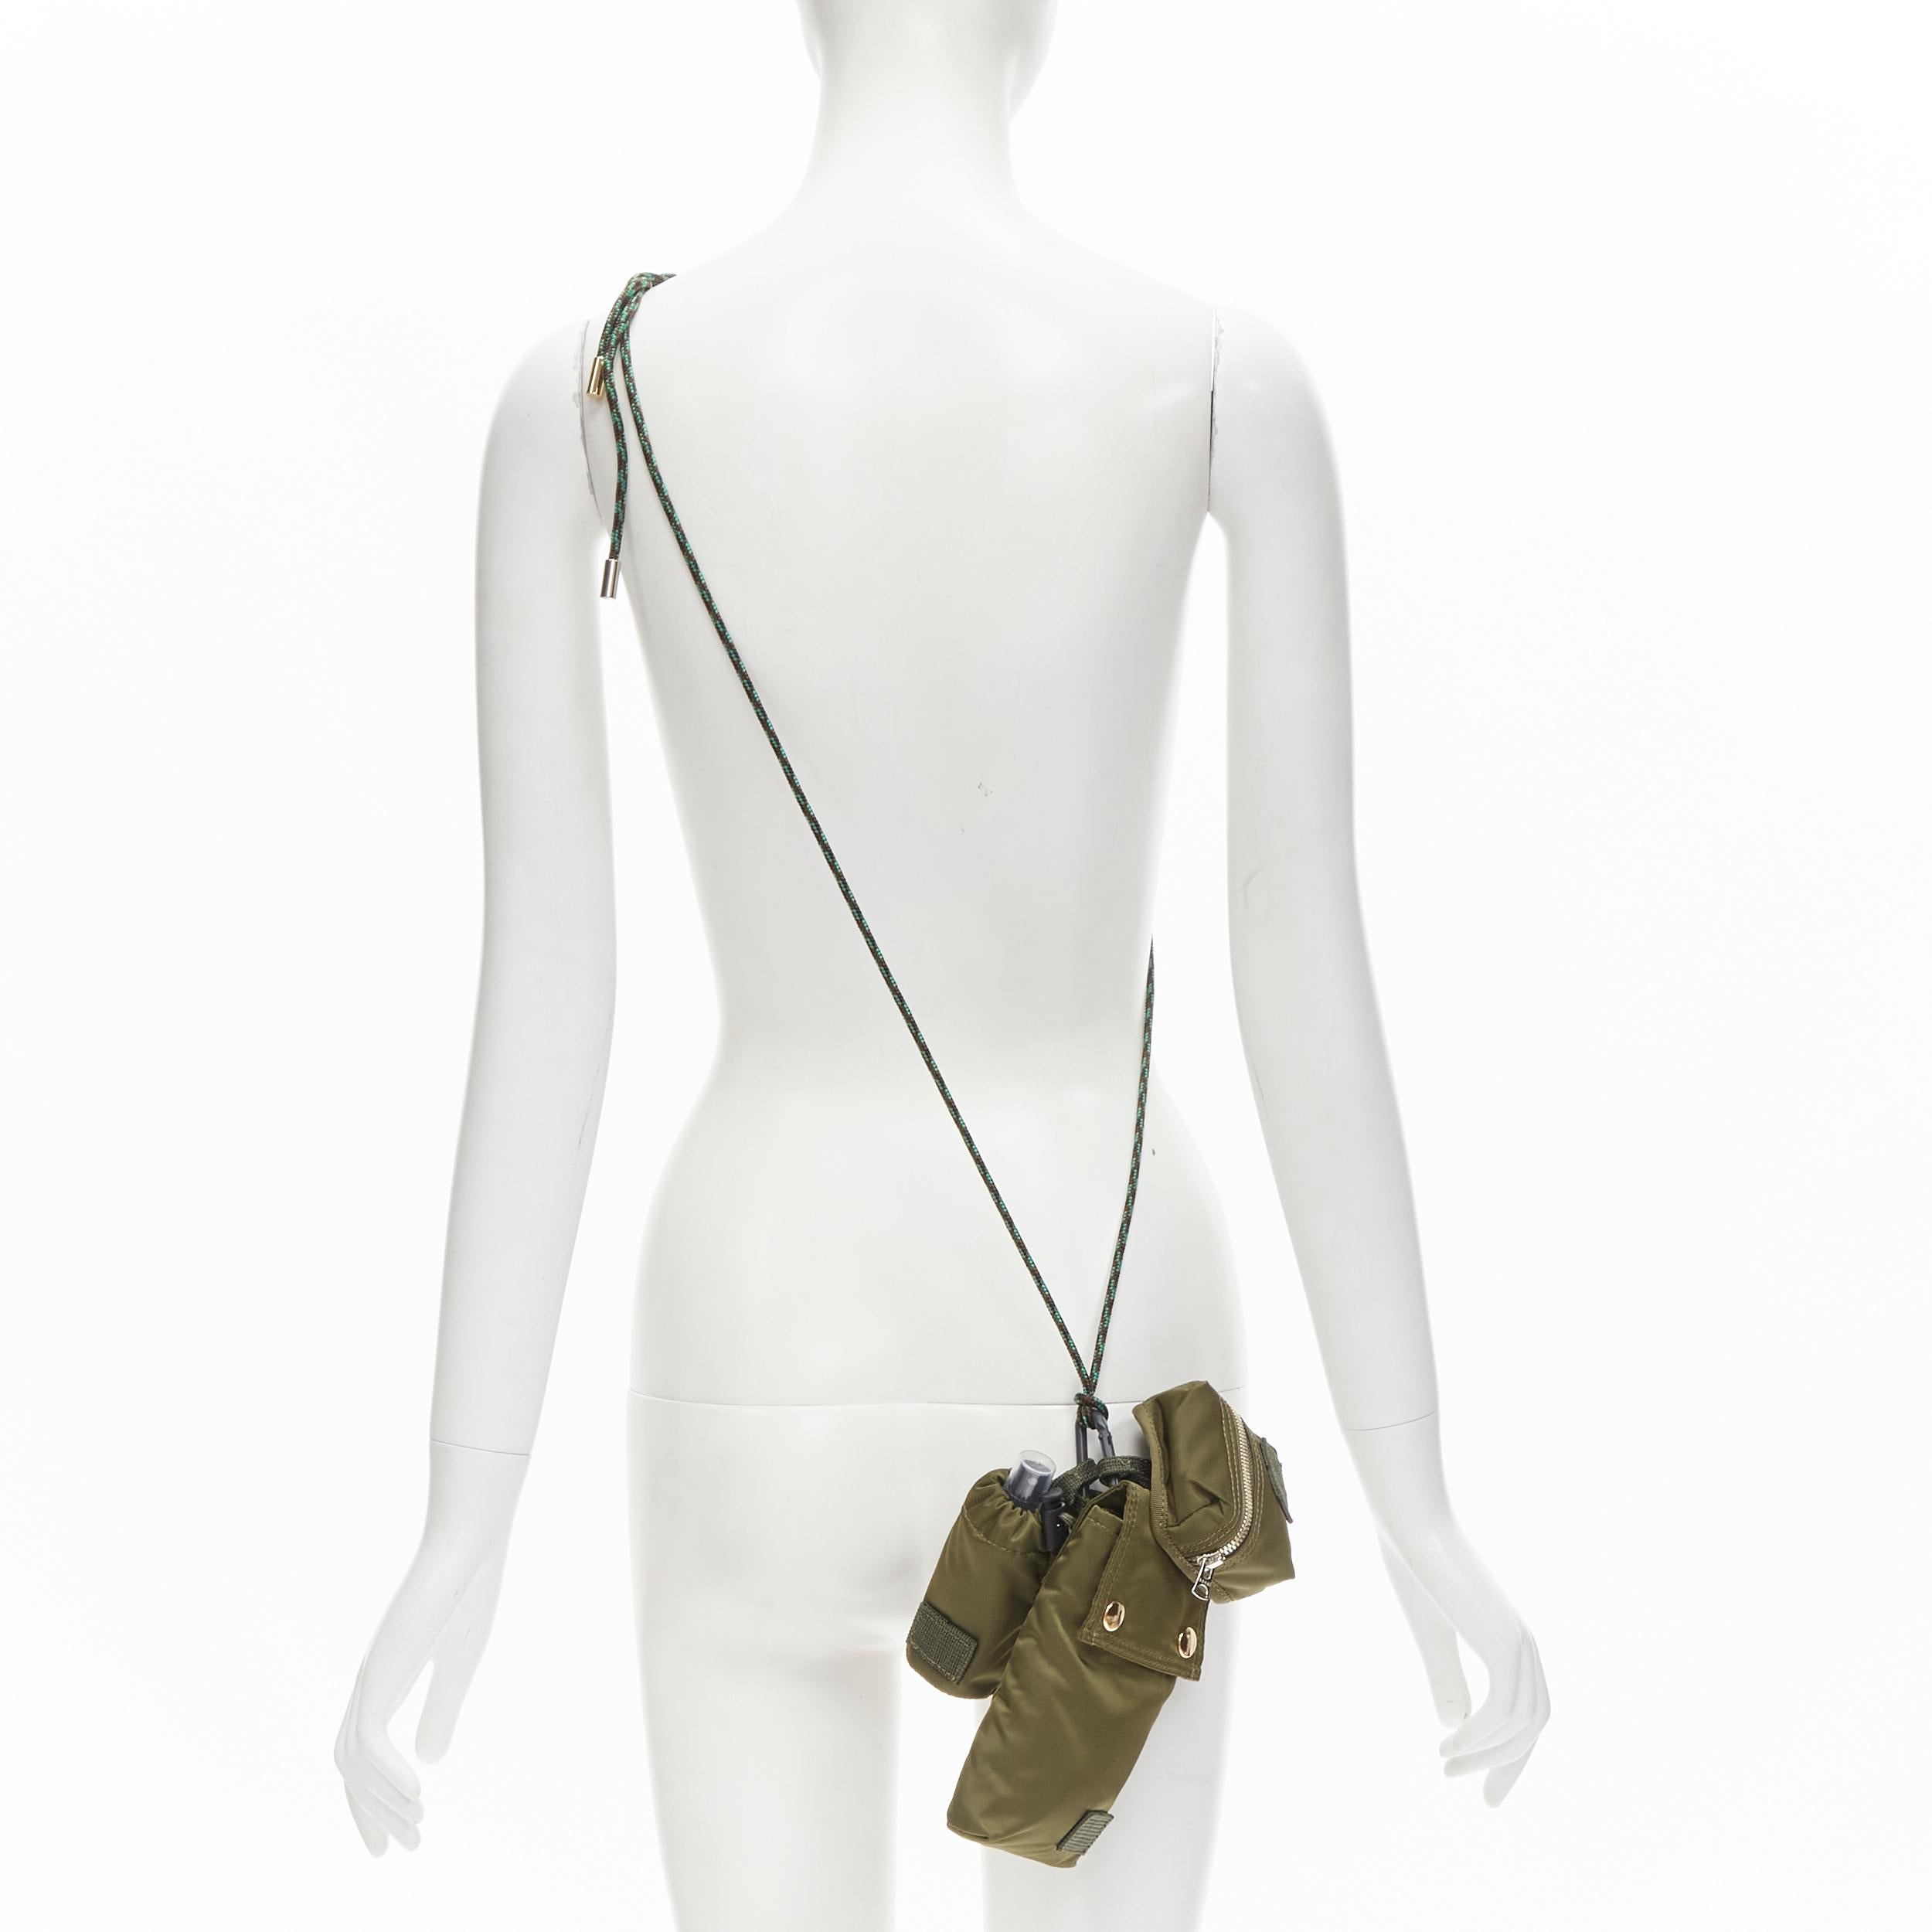 SACAI PORTER green nylon 3-in-1 pouch spray bottle lanyard crossbody bag 
Reference: ANWU/A00040 
Brand: Sacai 
Collection: PORTER collection 
Material: Nylon 
Color: Green 
Pattern: Solid 
Extra Detail: Attached with rein lock- detachable. 
Comes